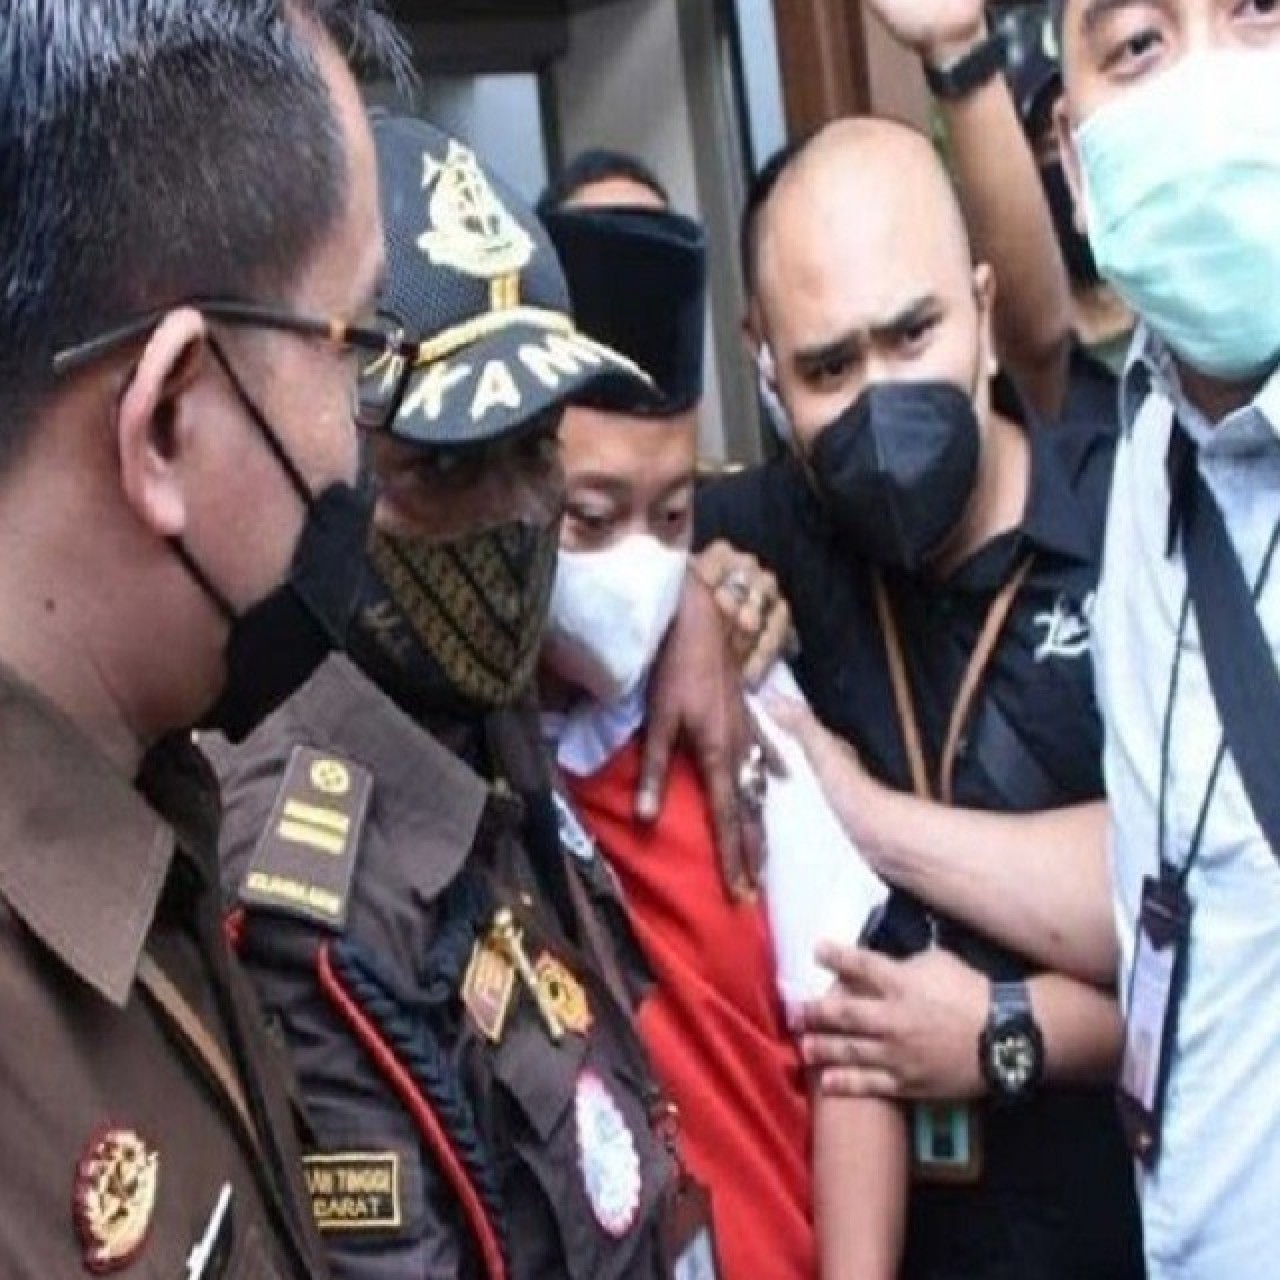 Death sentence handed down for rapist of 13 students